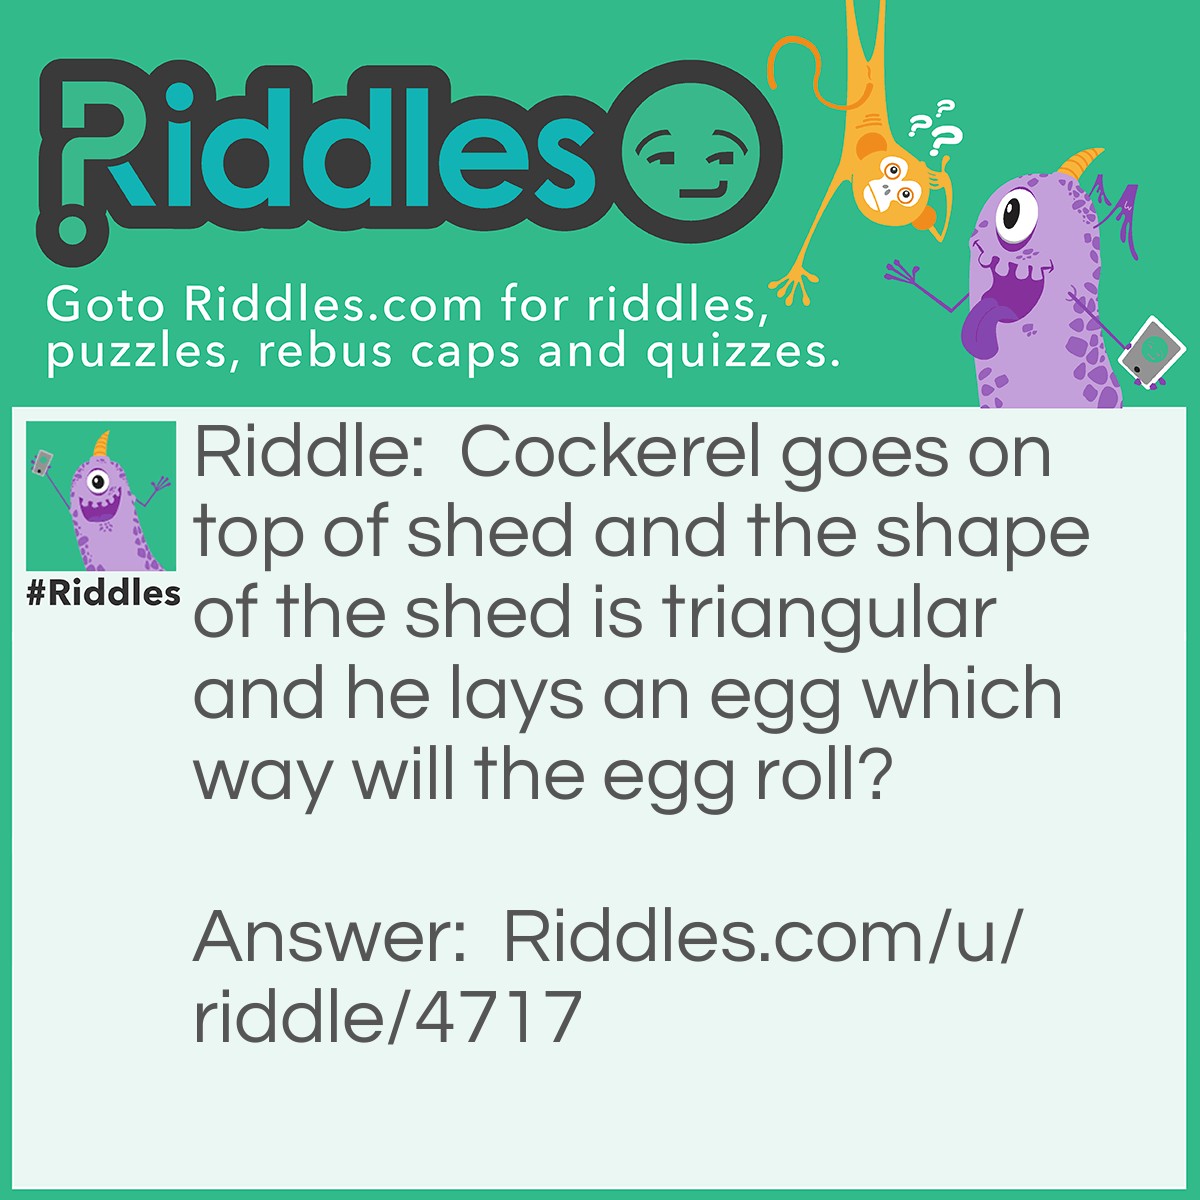 Riddle: Cockerel goes on top of shed and the shape of the shed is triangular and he lays an egg which way will the egg roll? Answer: Cockerels don't lay eggs.